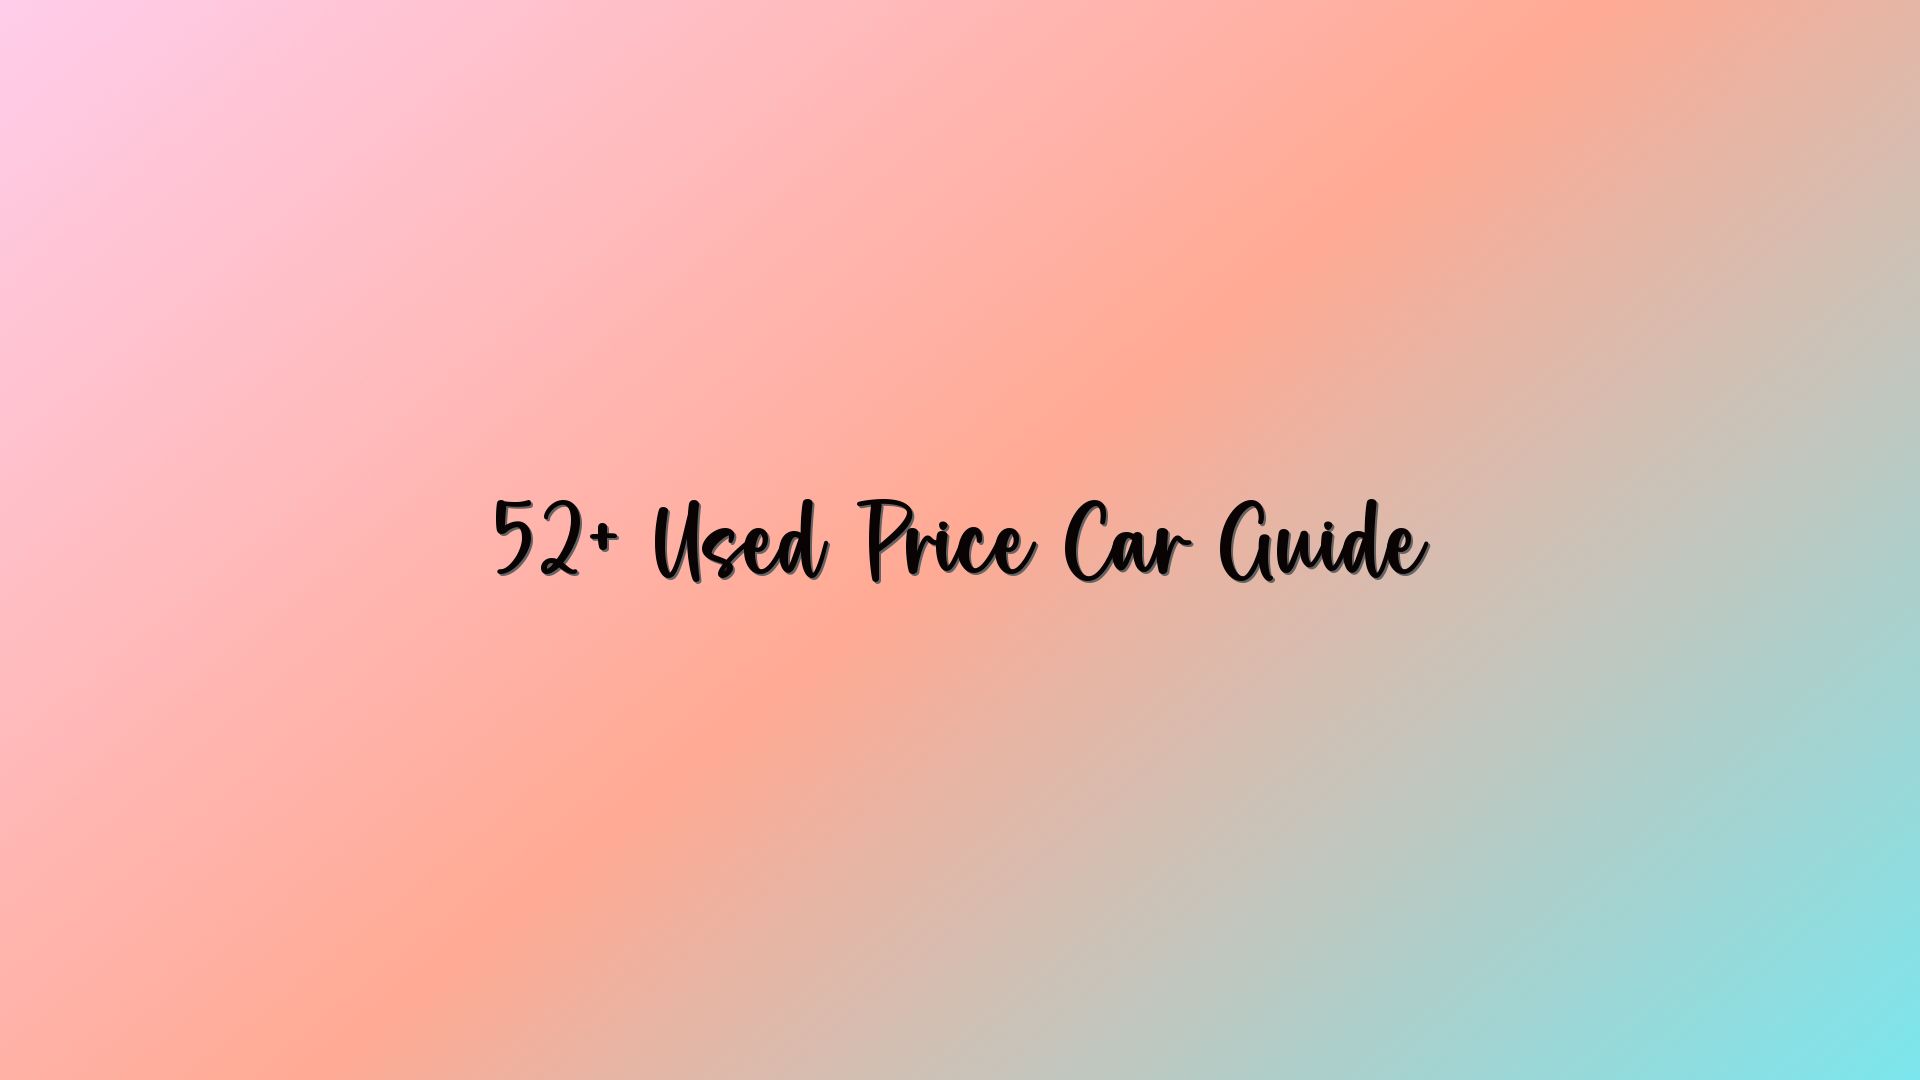 52+ Used Price Car Guide